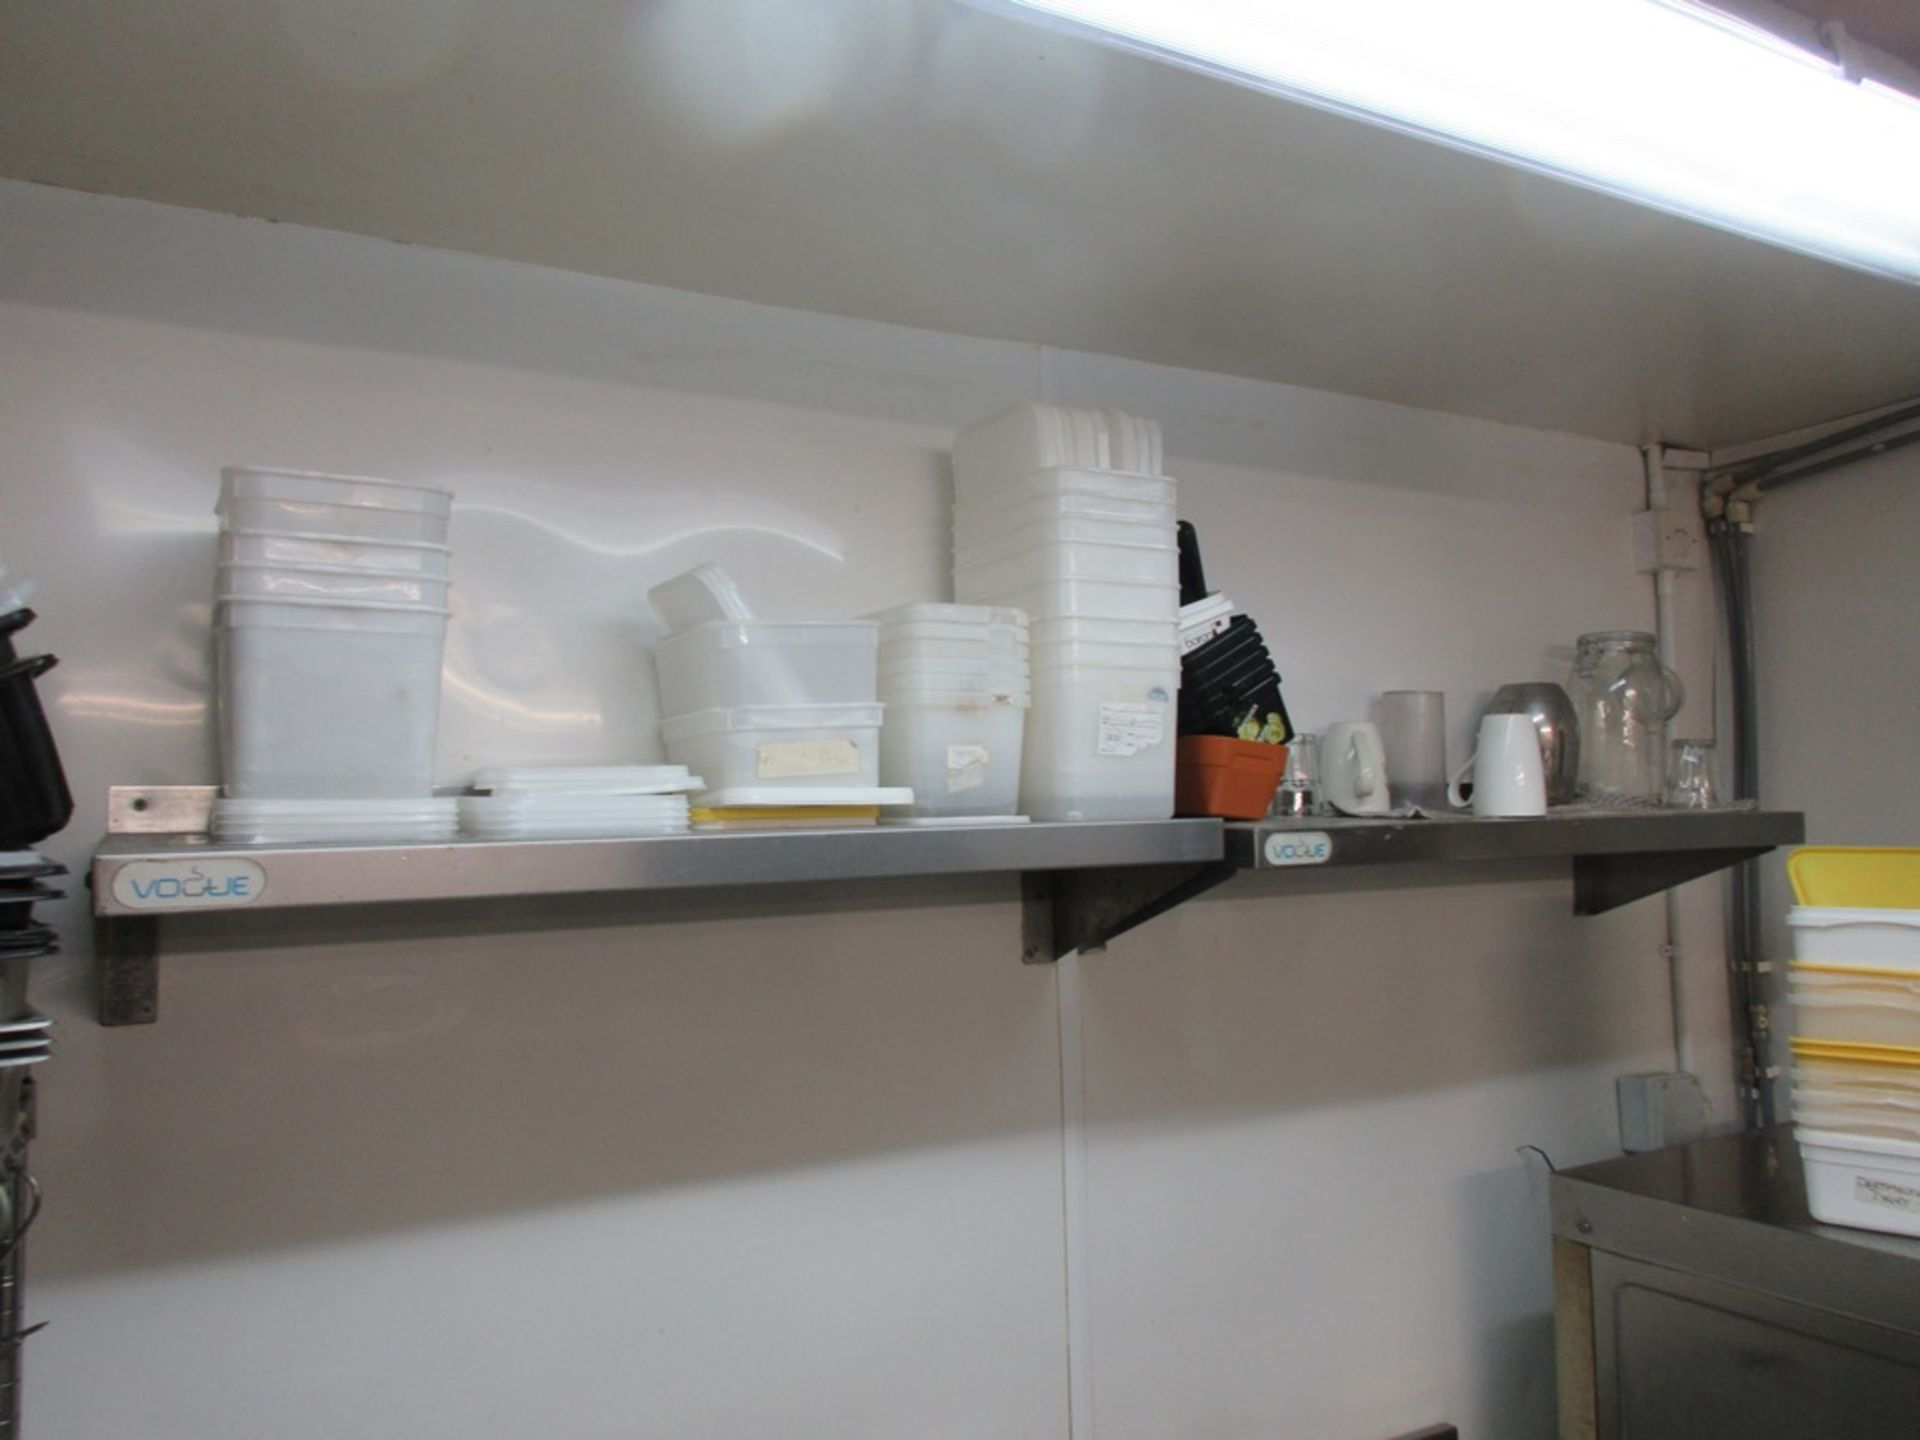 Four Vogue stainless steel shelves, approx. size, 3 x 900mm x 300mm / 1 x 1.2m x 300mm - Image 3 of 5